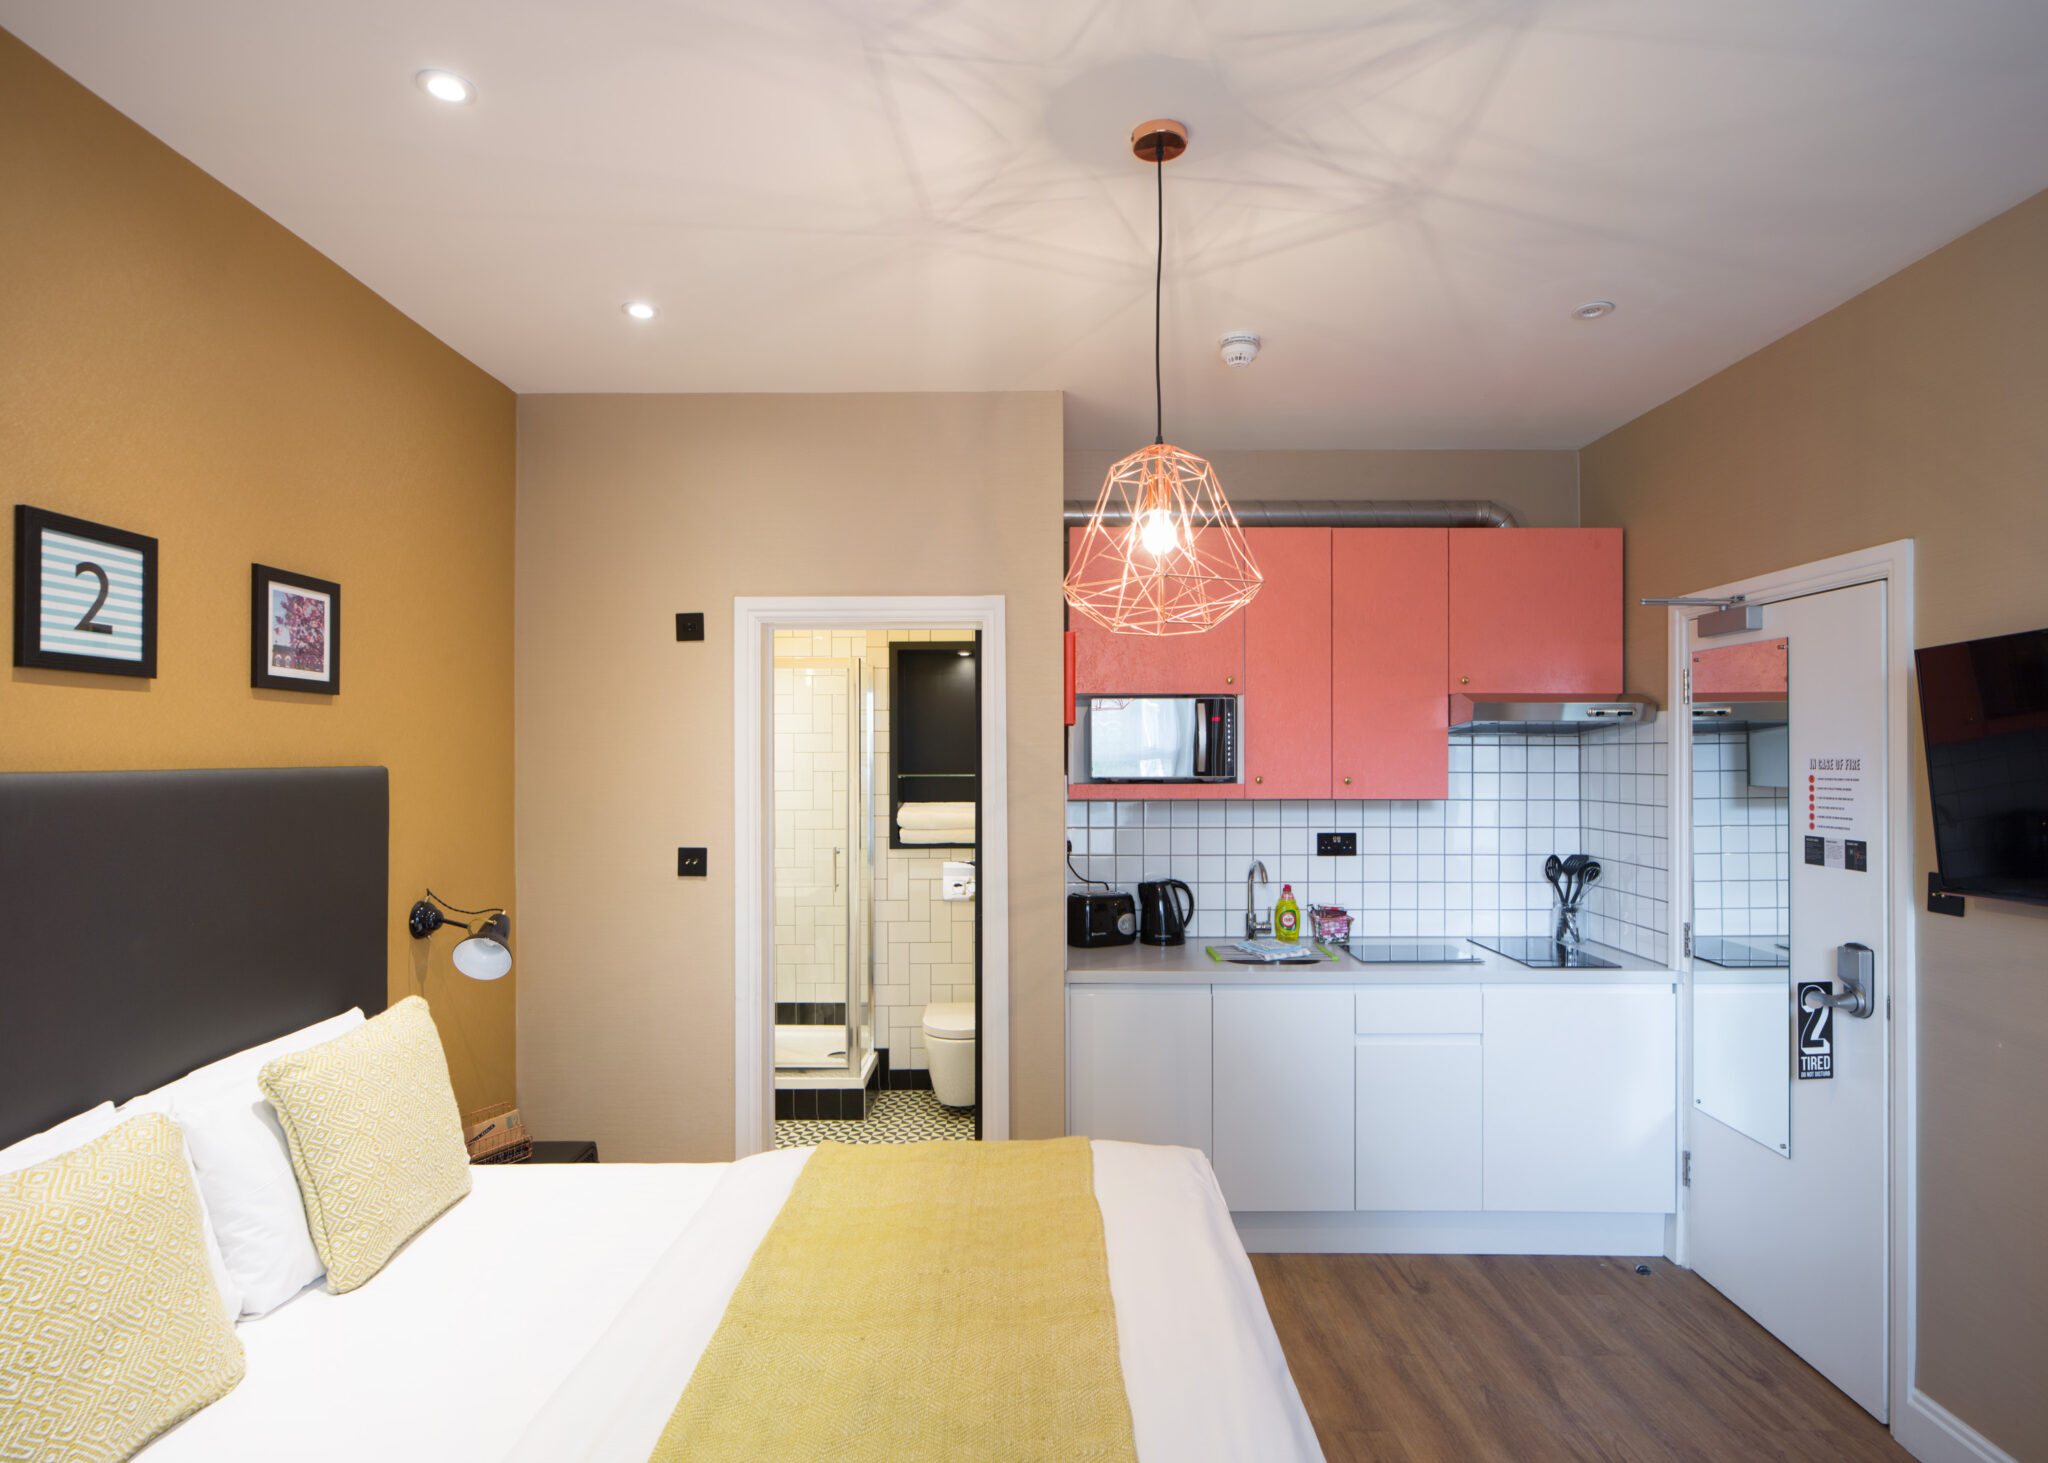 Enjoy modern comforts at our Serviced Accommodation West London. Book Room2 Hammersmith Aparthotel for short stays and corporate relocation.